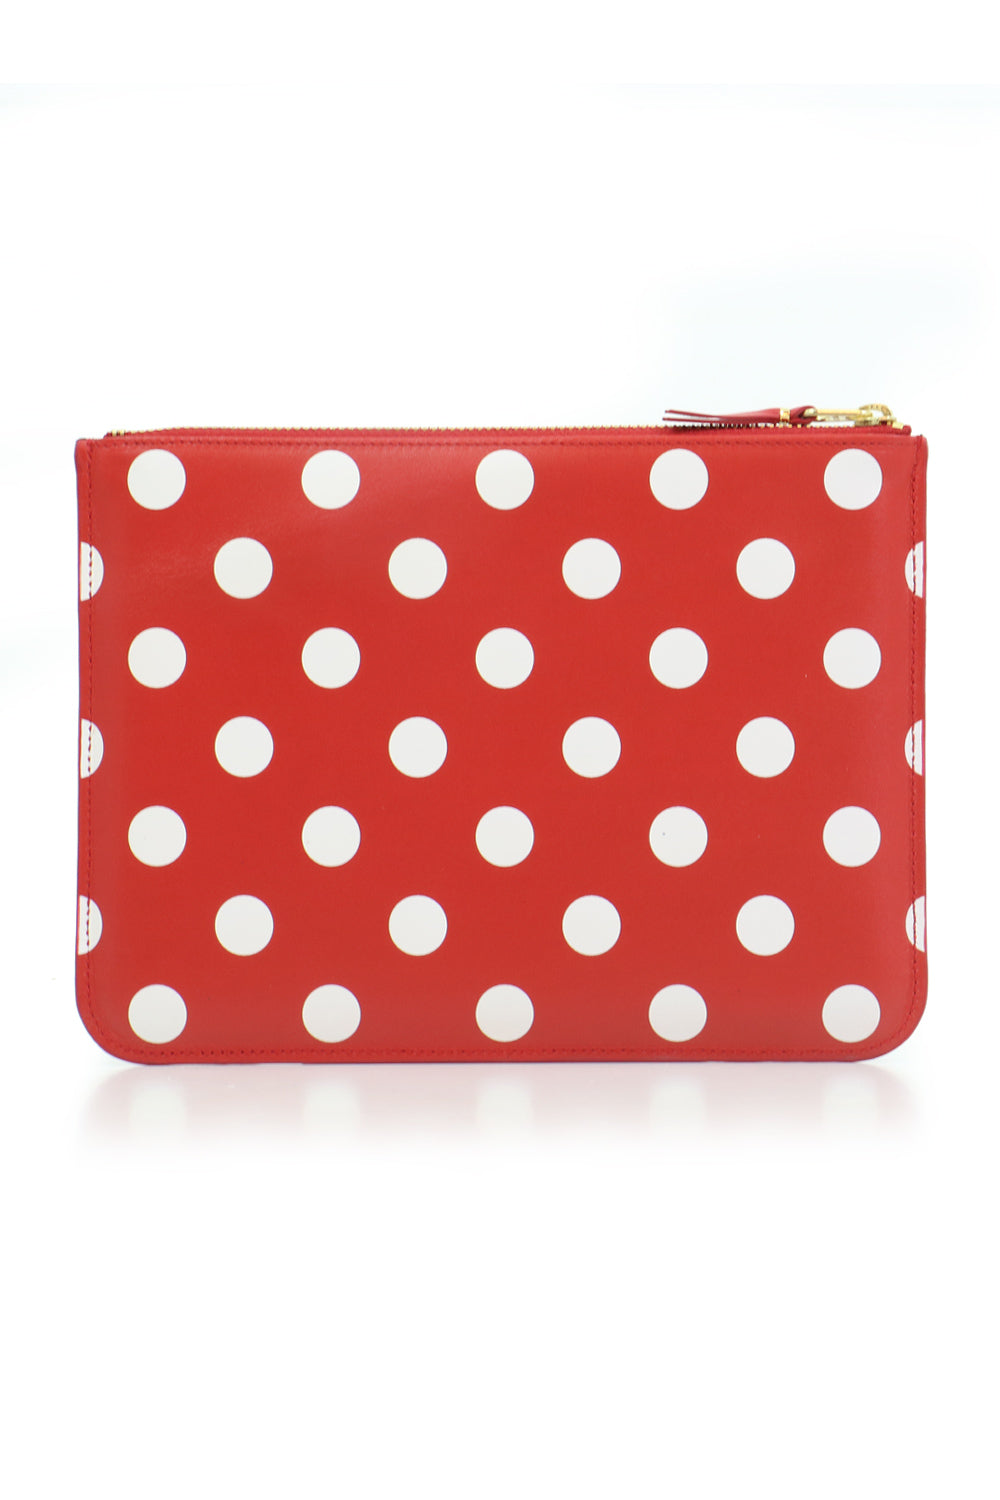 COMME DES GARCONS BAGS RED POLKA DOT LEATHER POUCH | RED